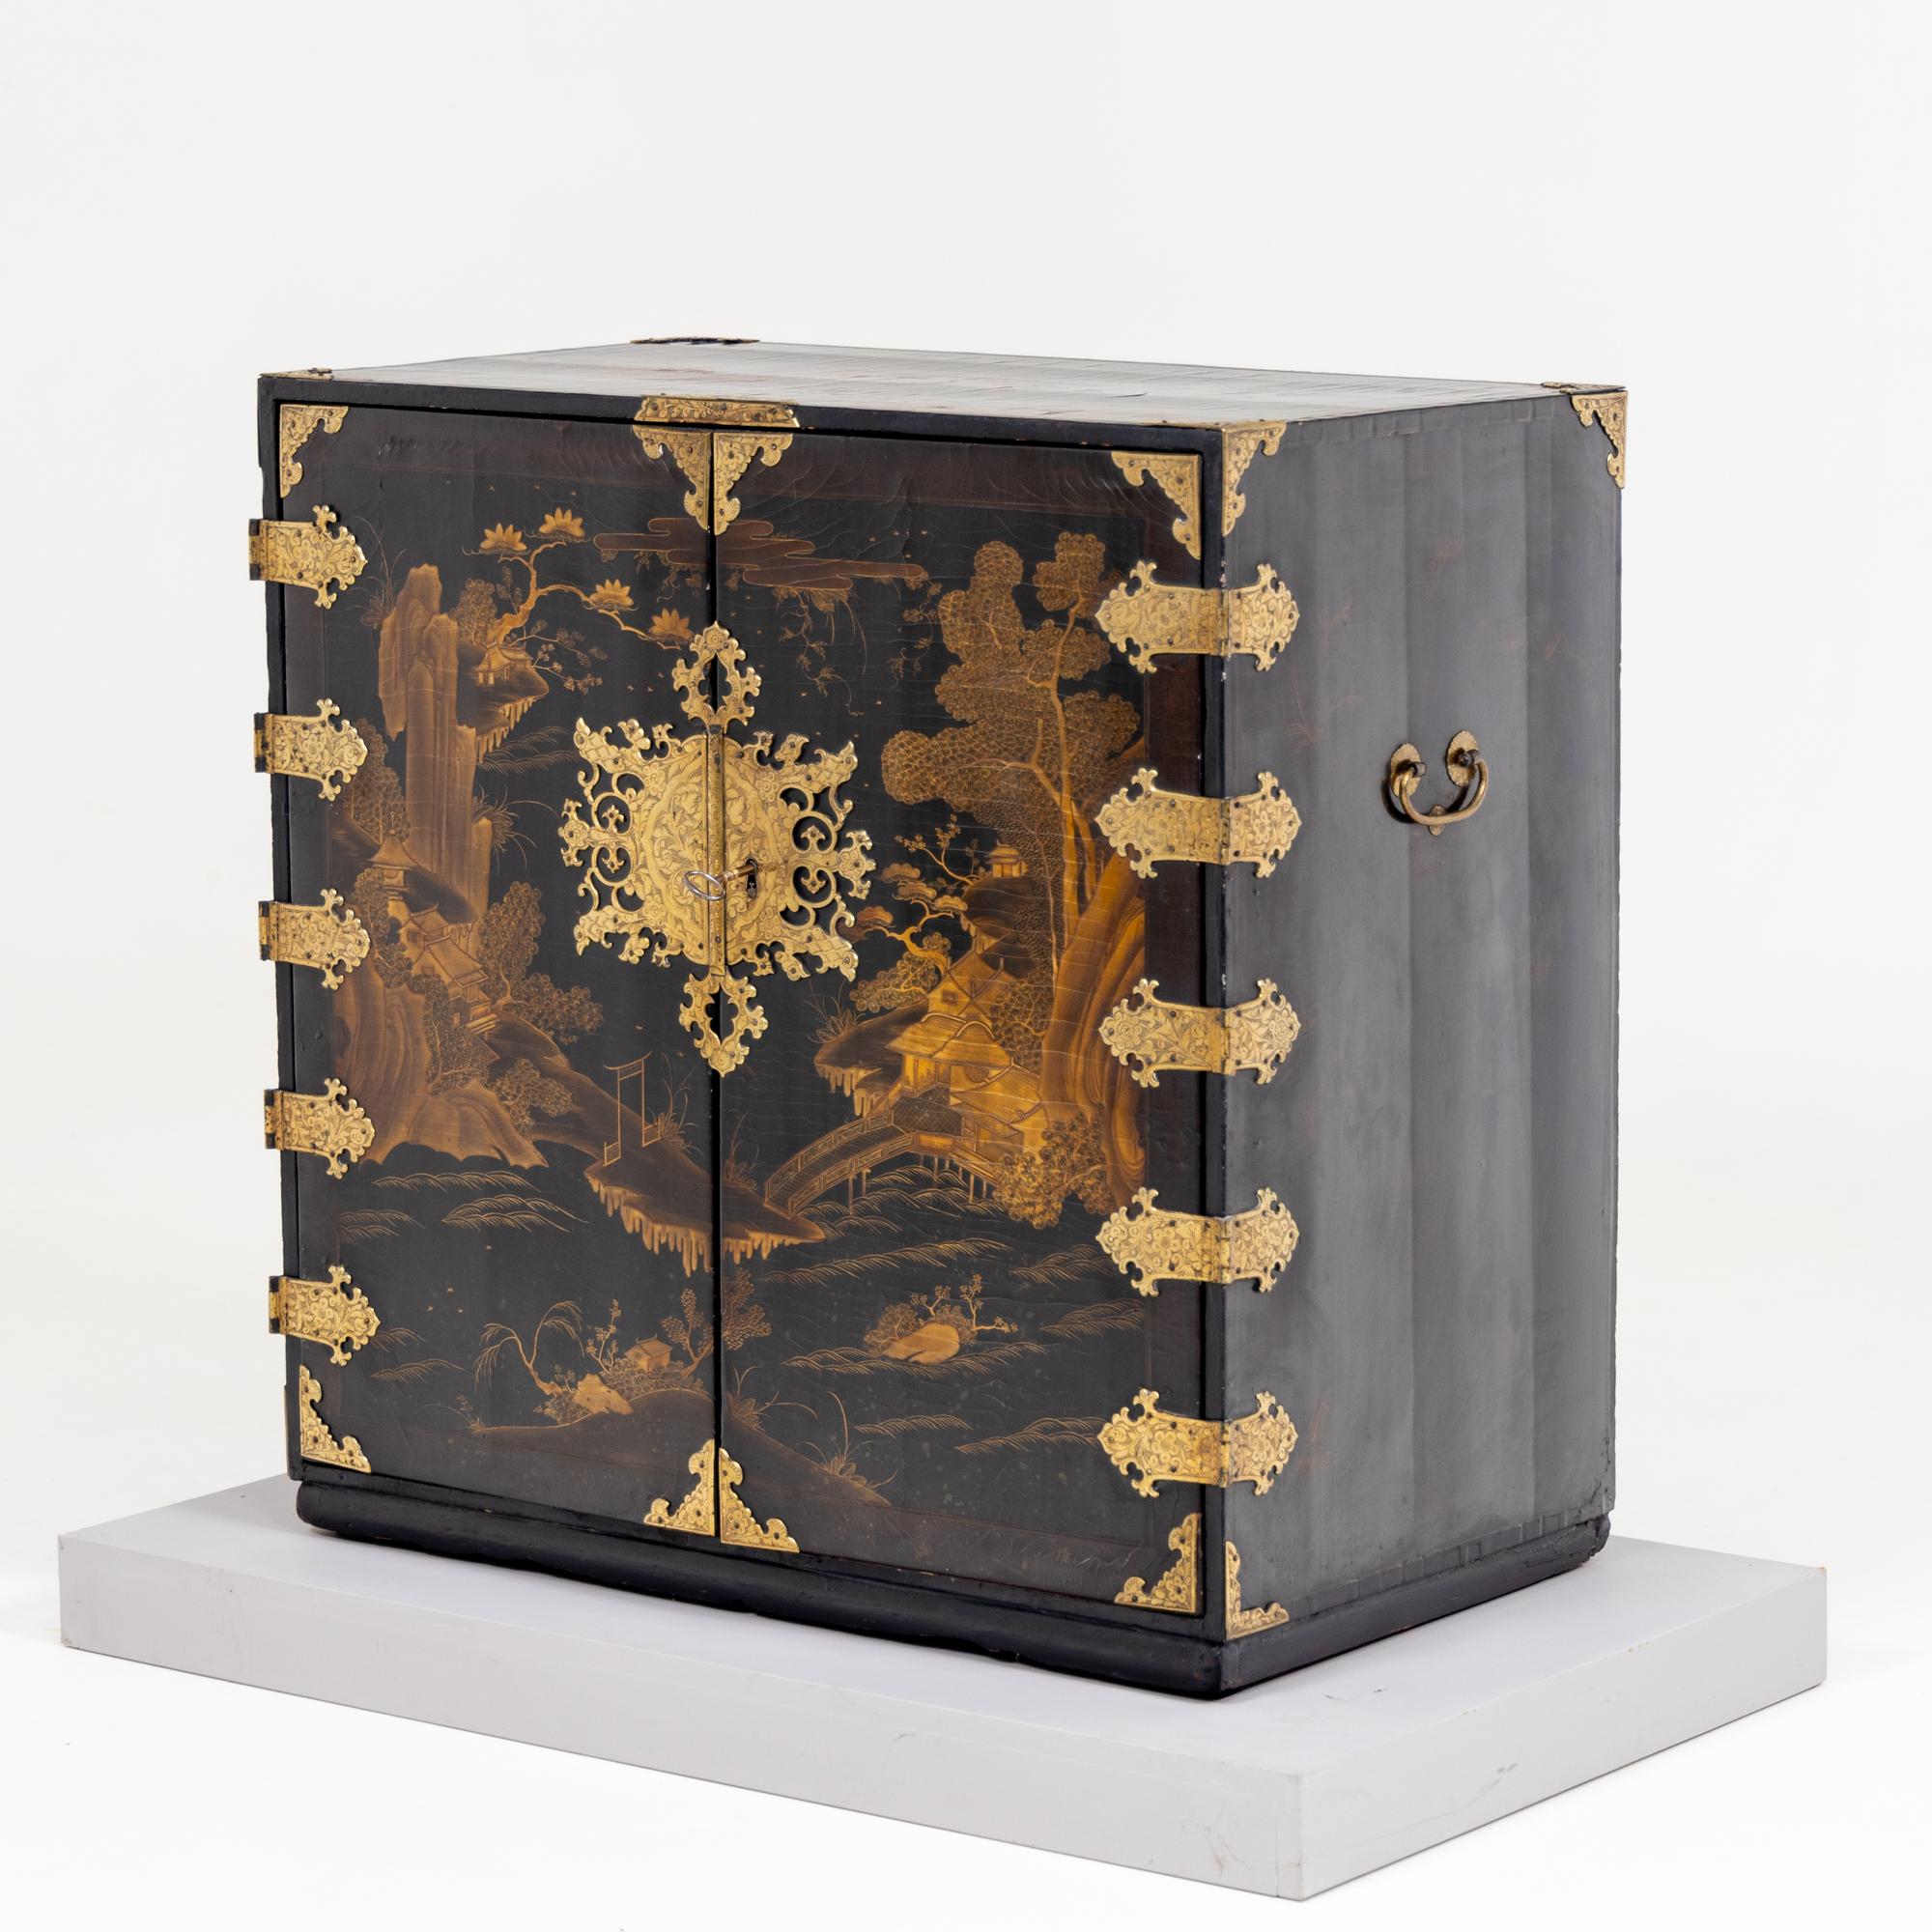 Two-door black lacquer cabinet made in Japan for the European market towards the end of the 17th century. The cabinet is decorated at the corners and in the centre as a key escutcheon with metal fittings of gilded copper with floral decoration. The